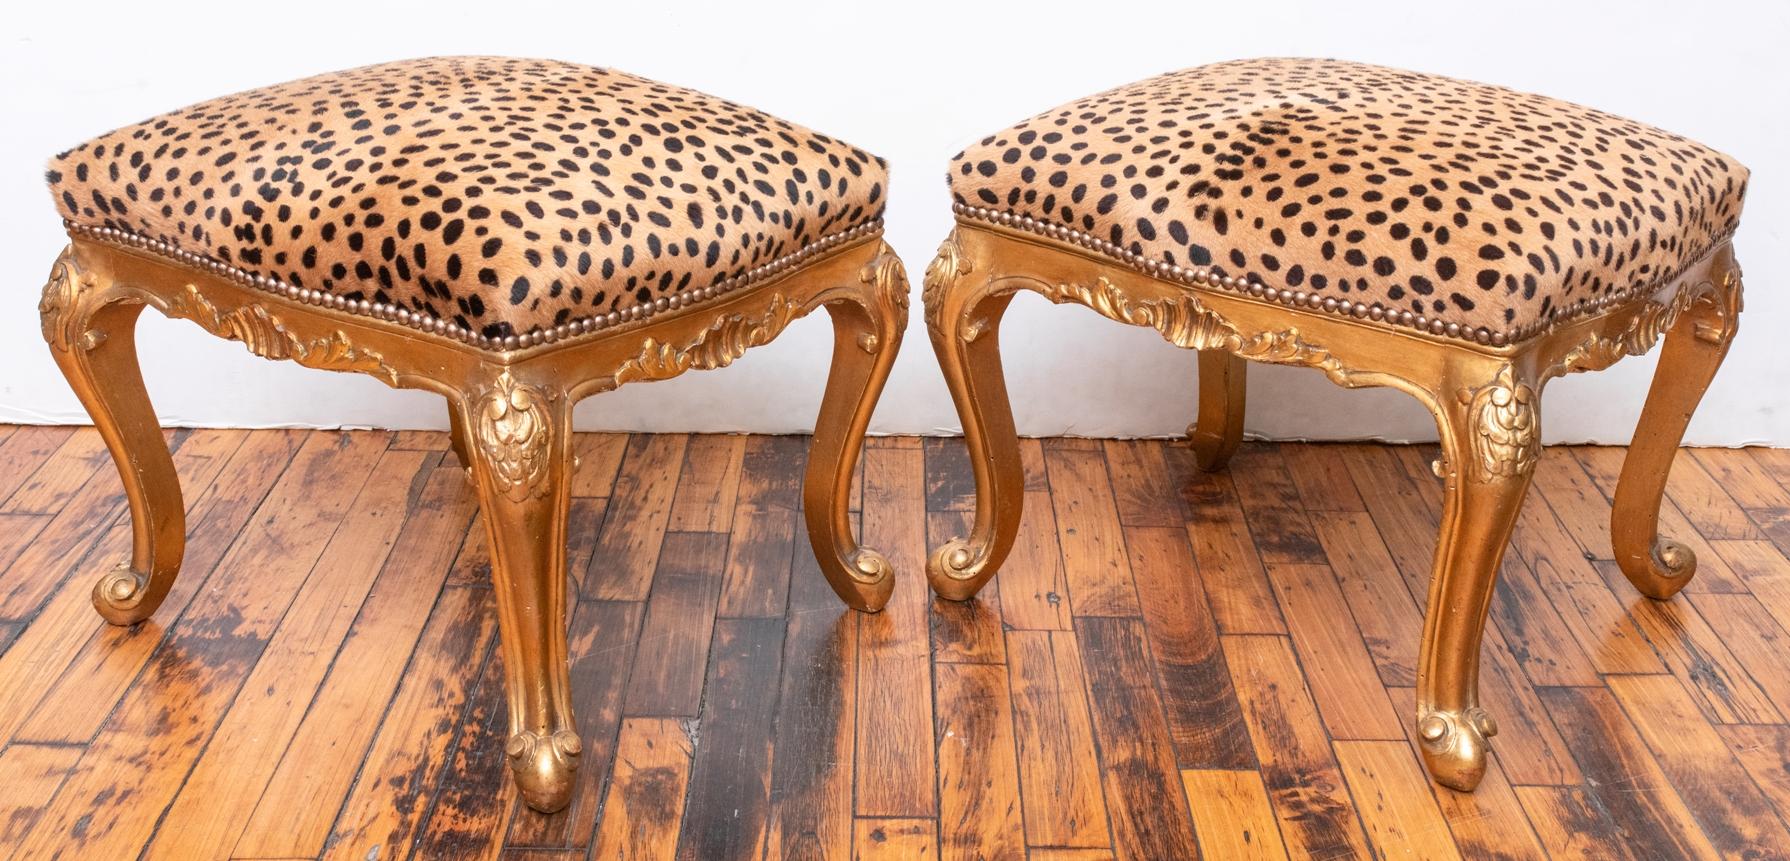 Pair of 1940s Italian Florentine wood benches. Benches were recently upholstered in faux leopard print leather. Gold leaf finish. 


